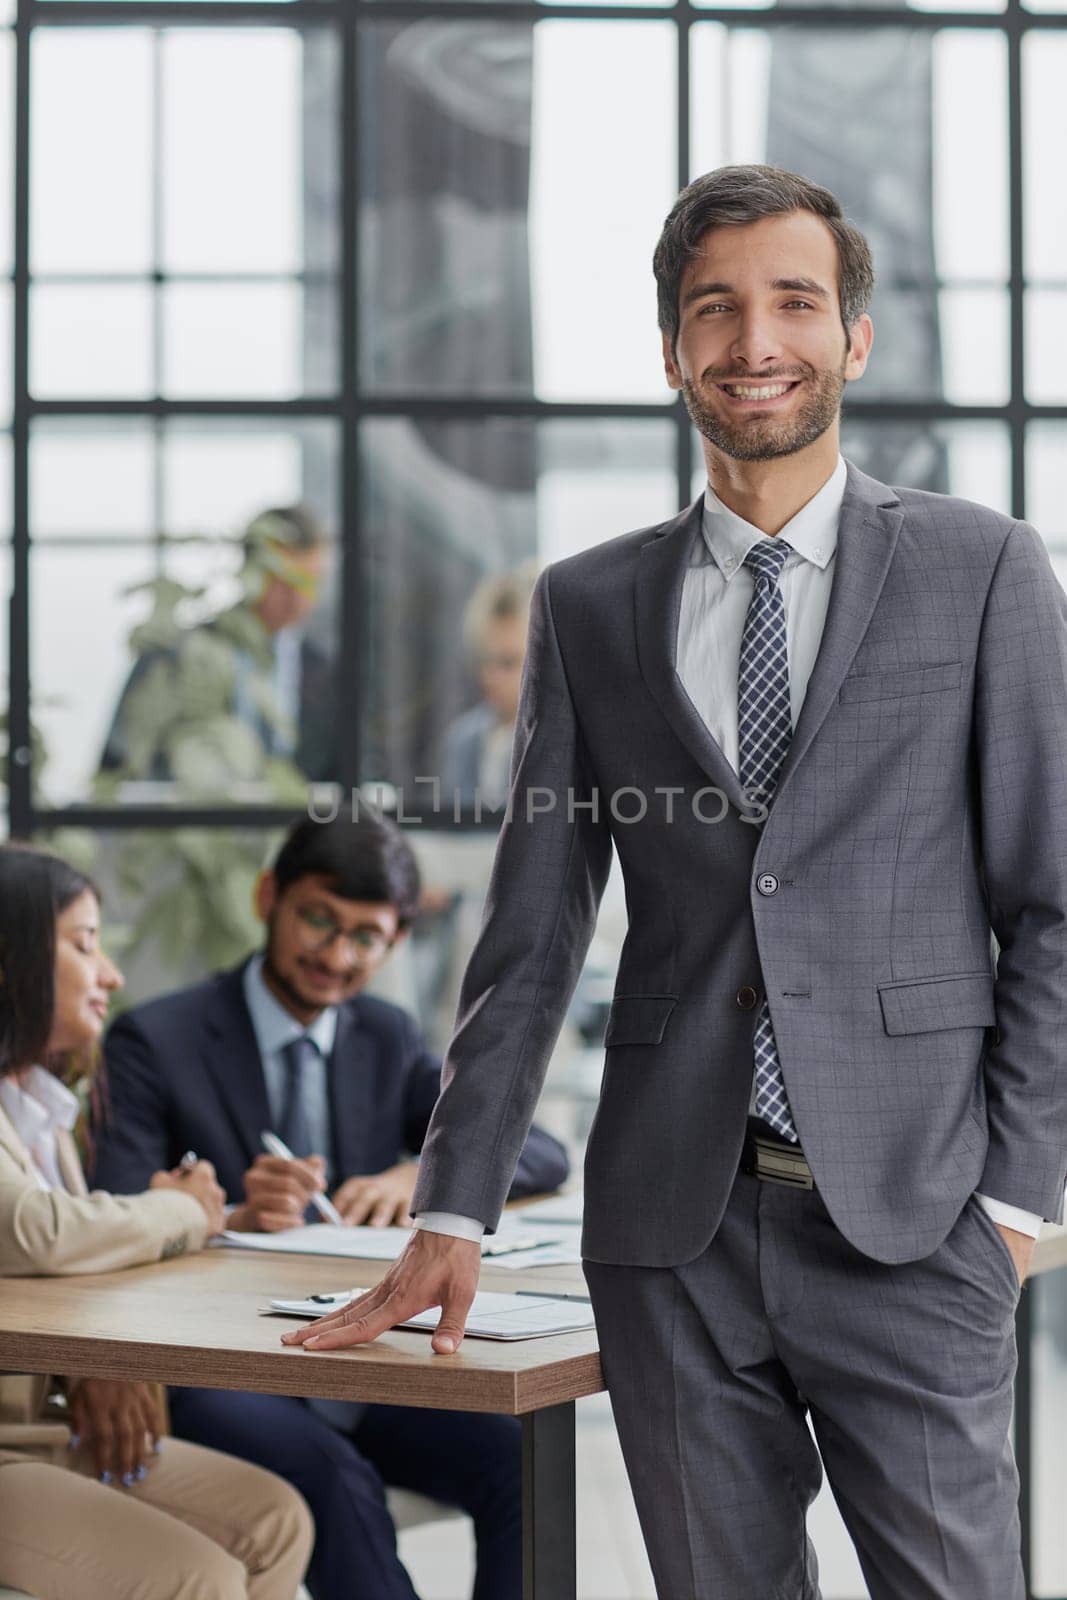 professional businessman, executive director of the company, sitting at the table in the office, with colleagues in the background